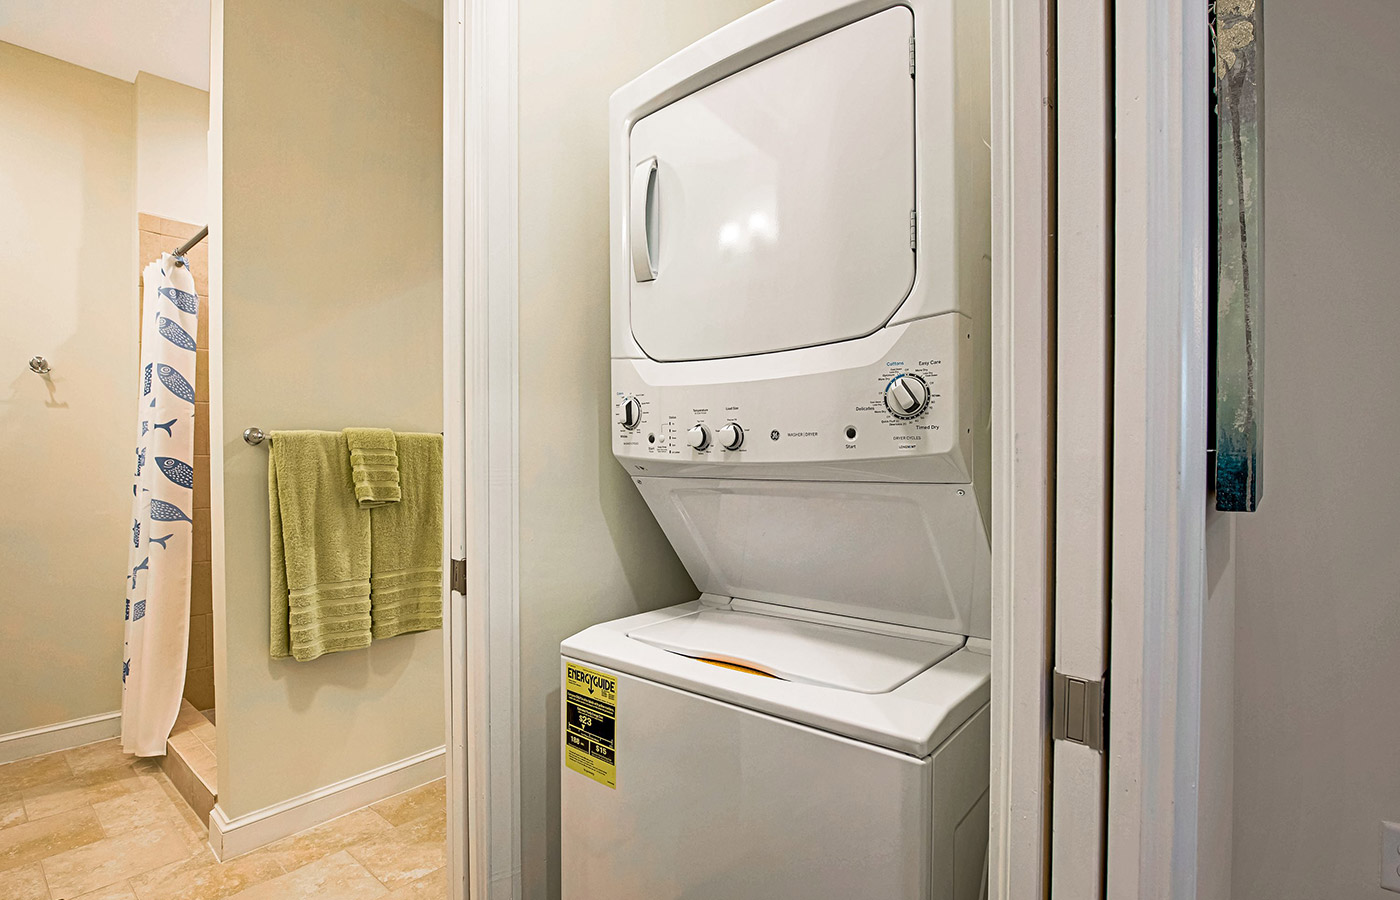 Washer and dryer units.